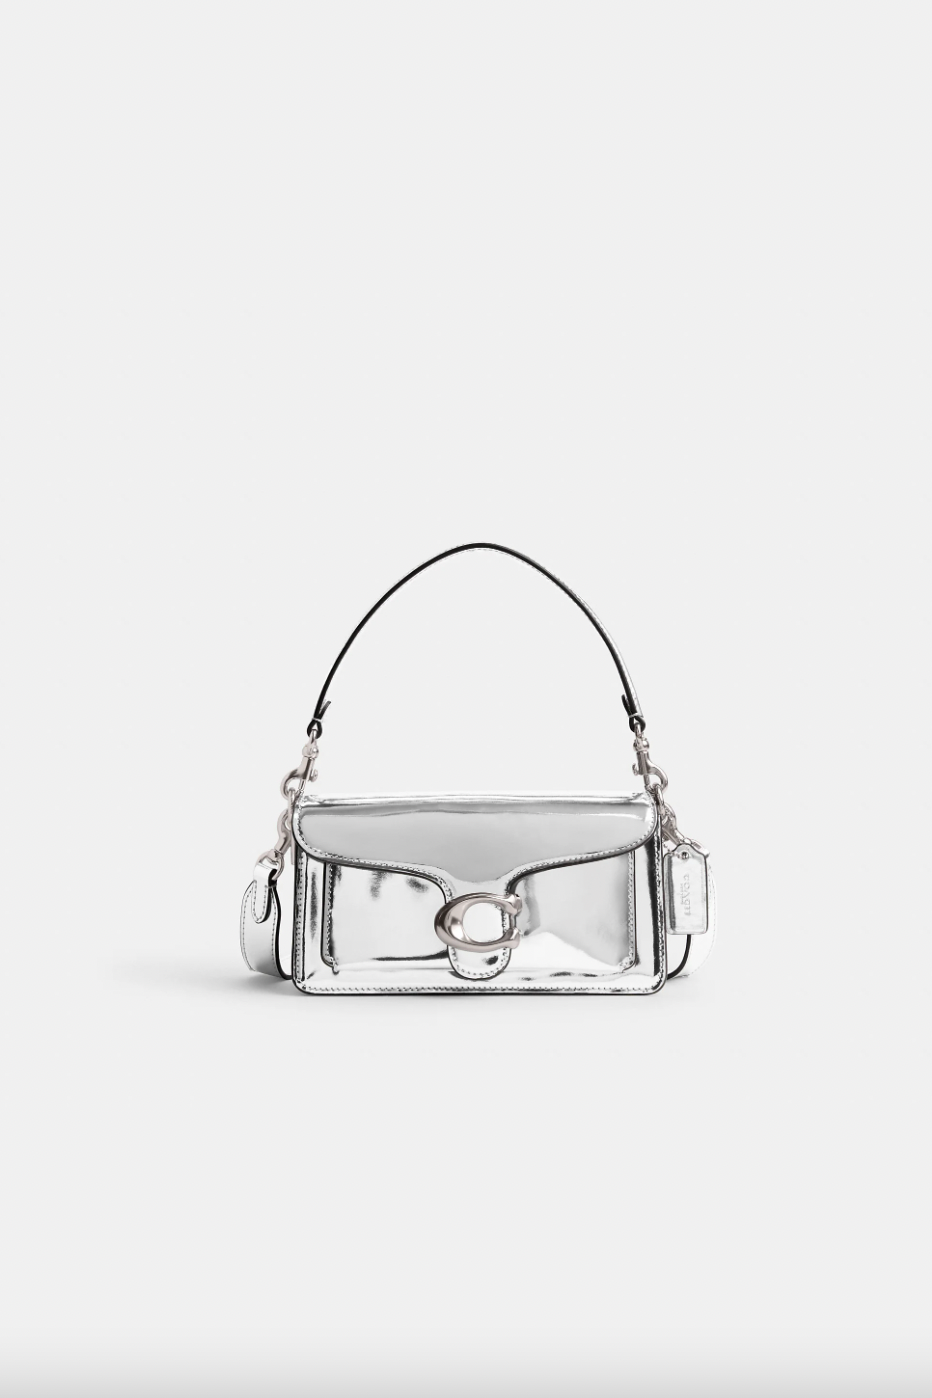 Is a coach bag worth the money, or are there cheaper alternatives that look  similar? - Quora